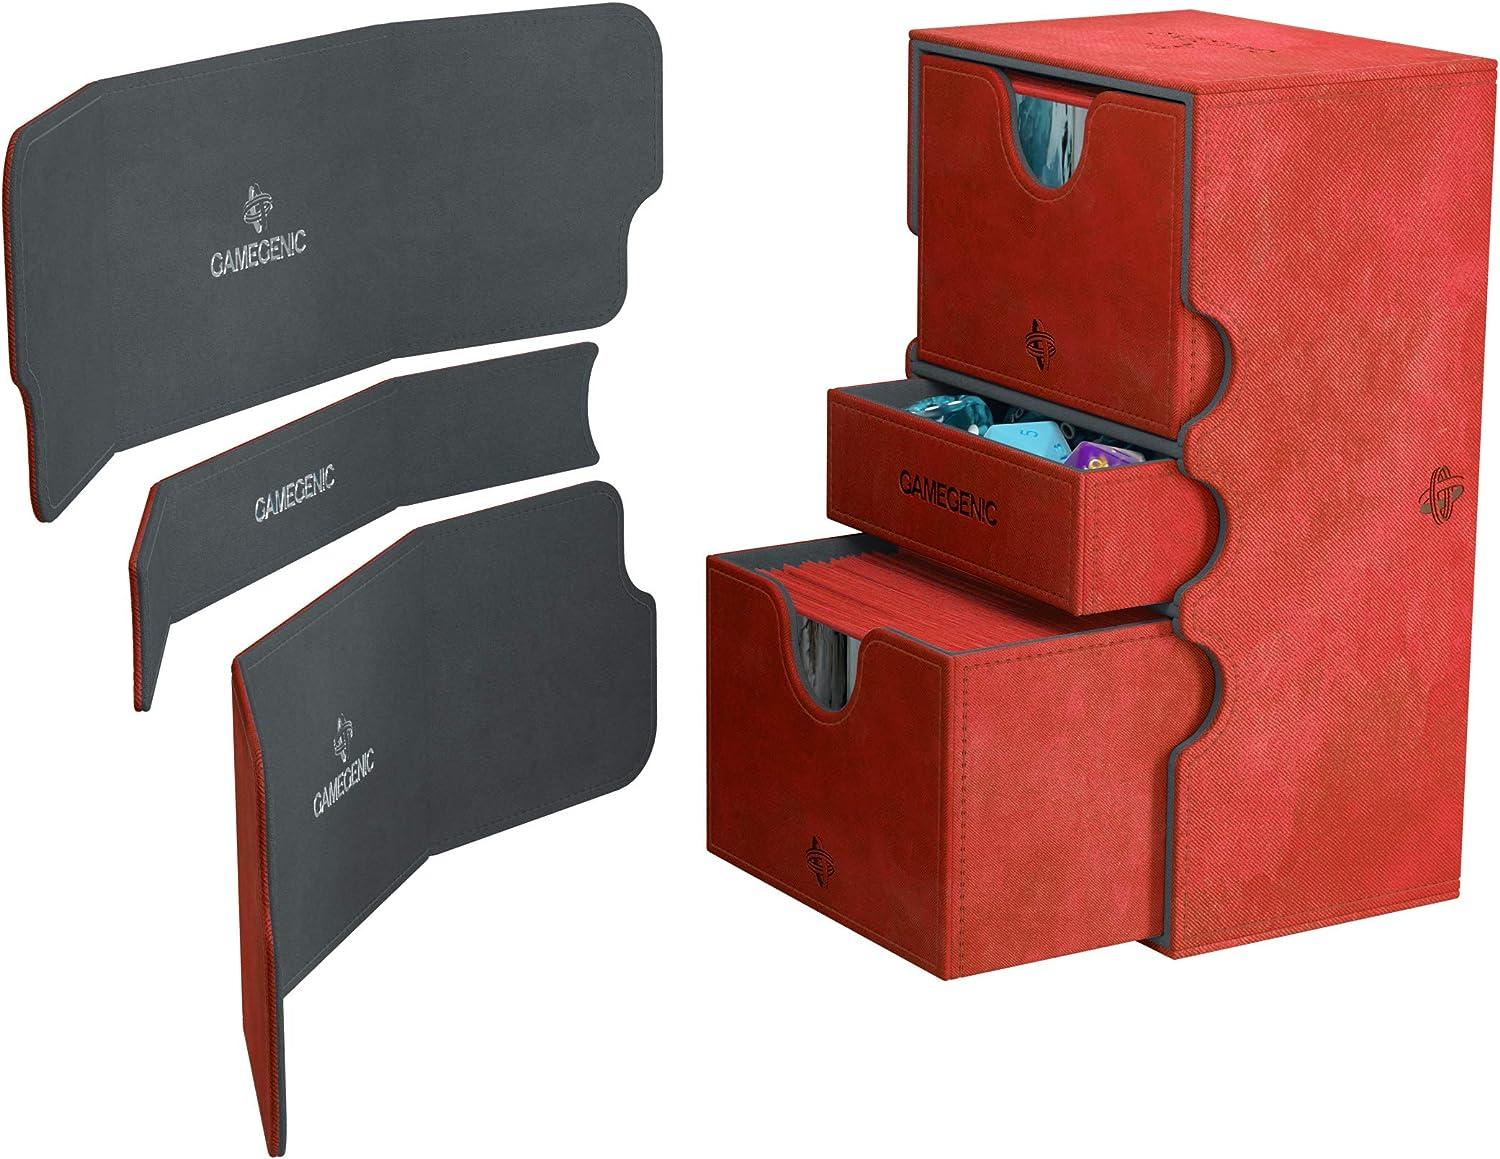 GameGenic Card Deck Box - Deck Convertible Red 200CT – Durable and Sturdy  TCG, OCG Card Storage – Compatible with Pokemon Yugioh Commander and MTG